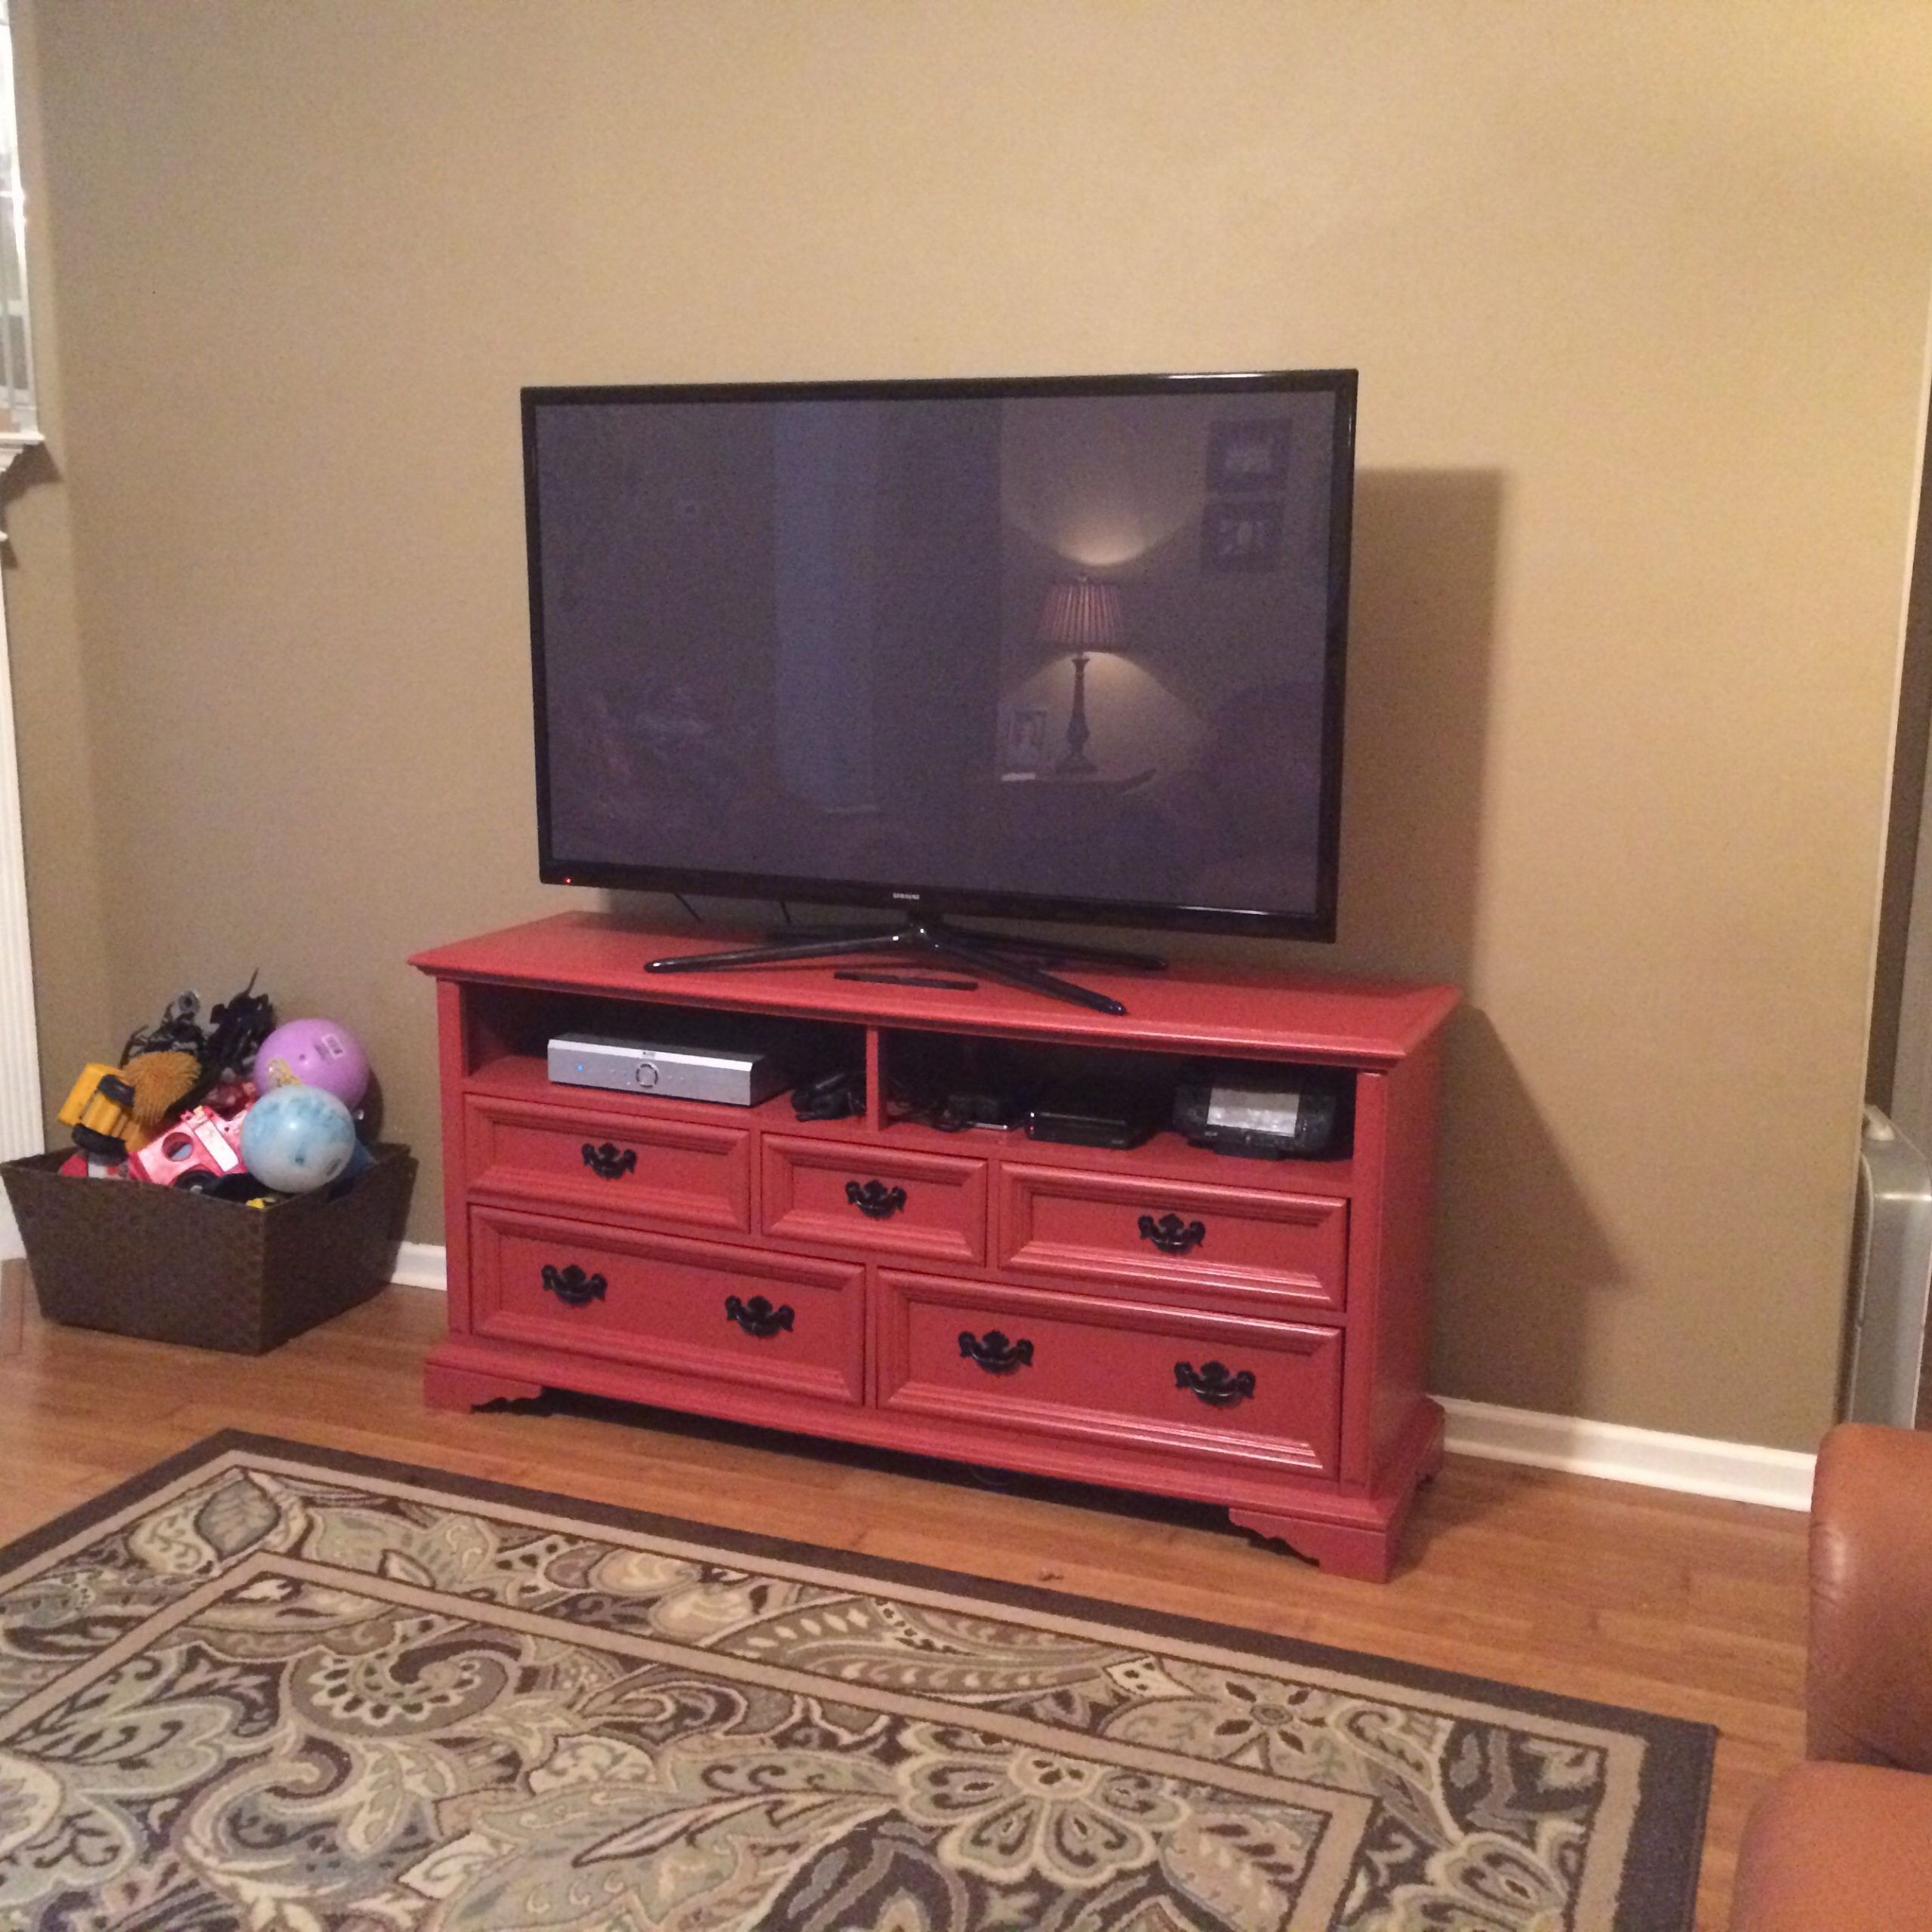 Painted Dresser Made Into A Tv Stand | Home Decor, Painted Inside Painted Tv Stands (View 7 of 15)